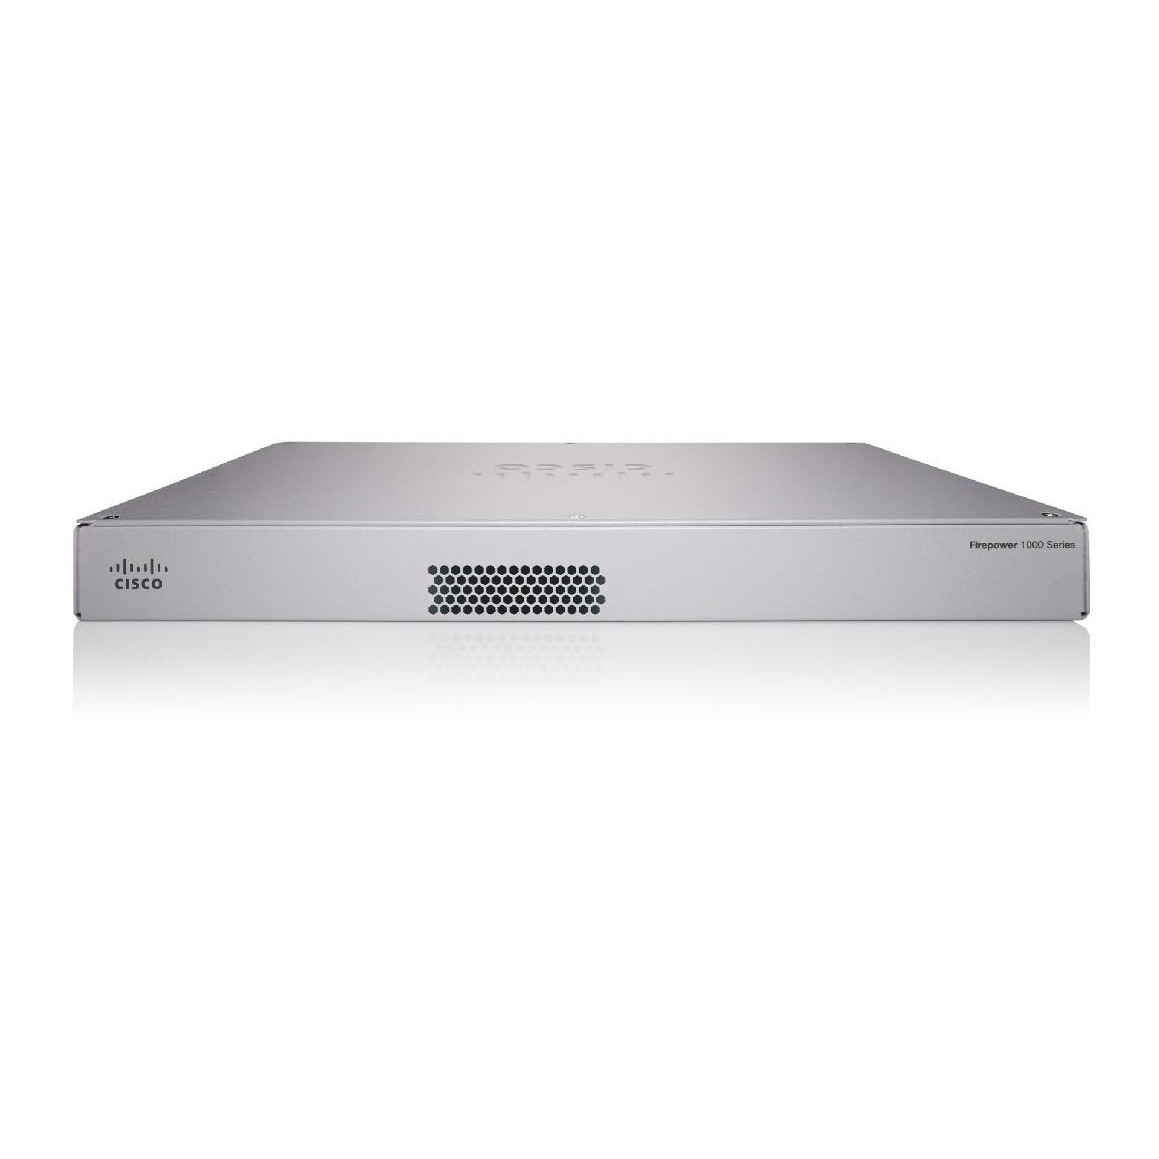 Cisco Firepower 1140 Two Unit High Availability Bundle (will order 2 identical chassis and software subscriptions)